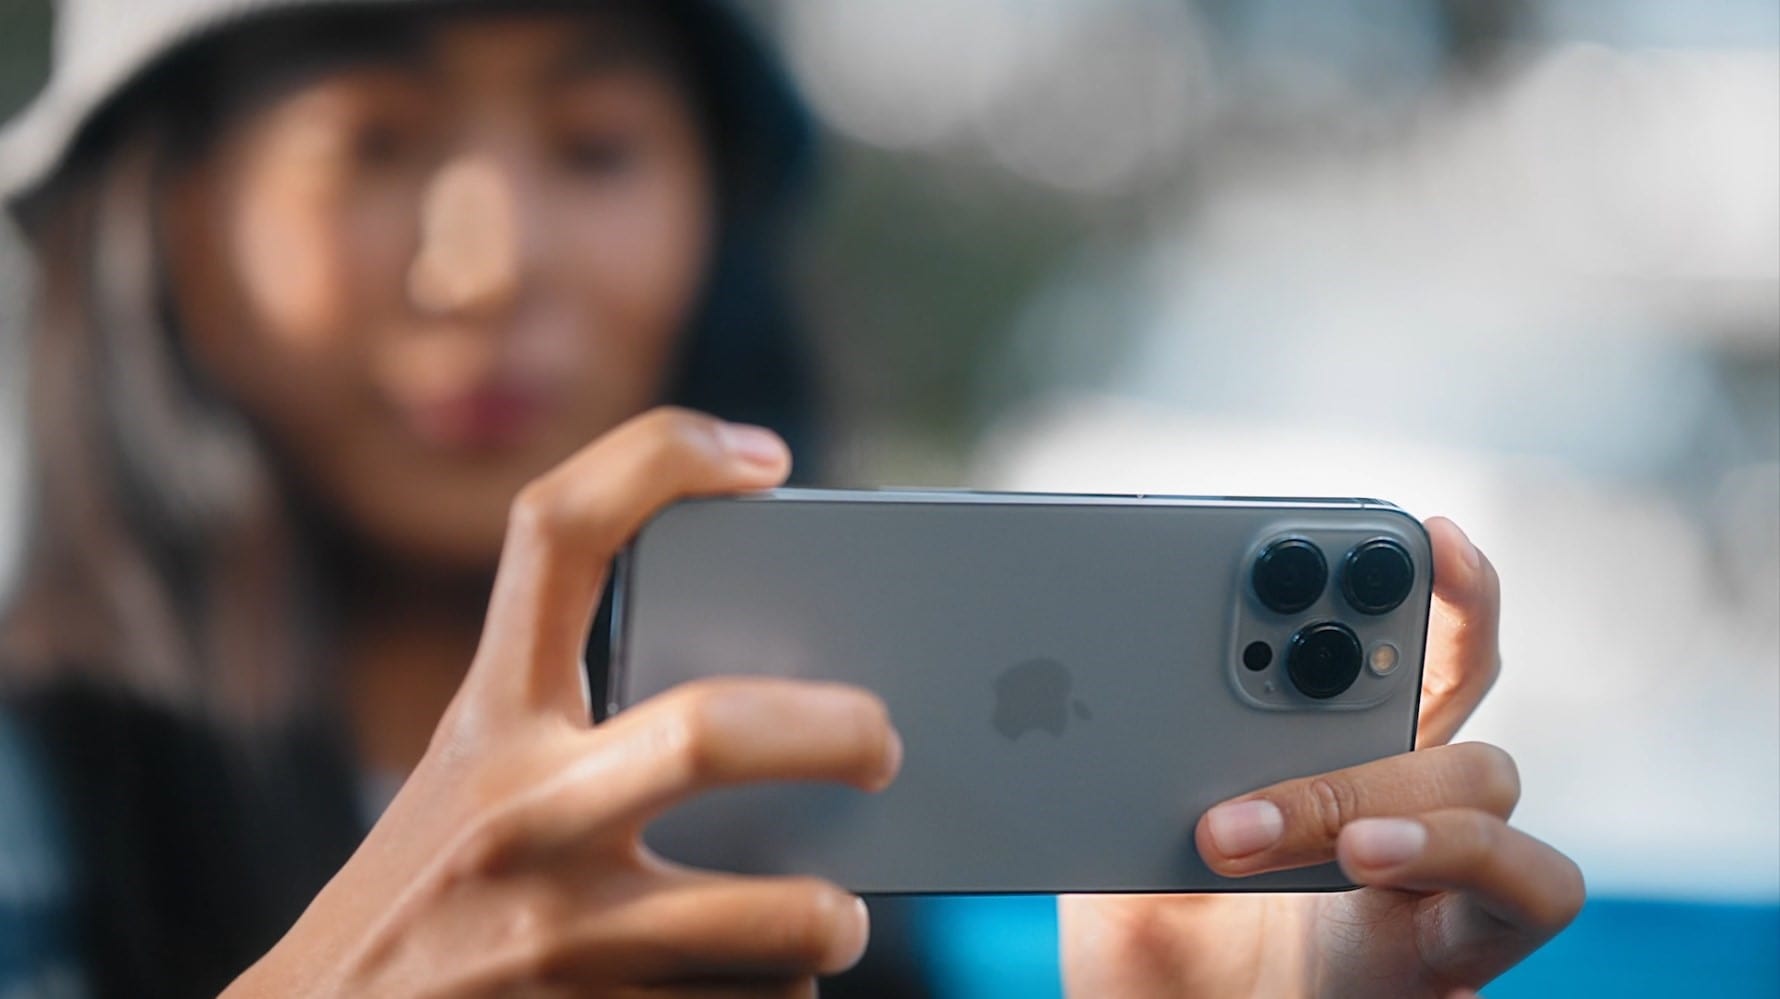 Not a bug, a feature: Apple promises to fix macro mode on iPhone 13 Pro smartphones